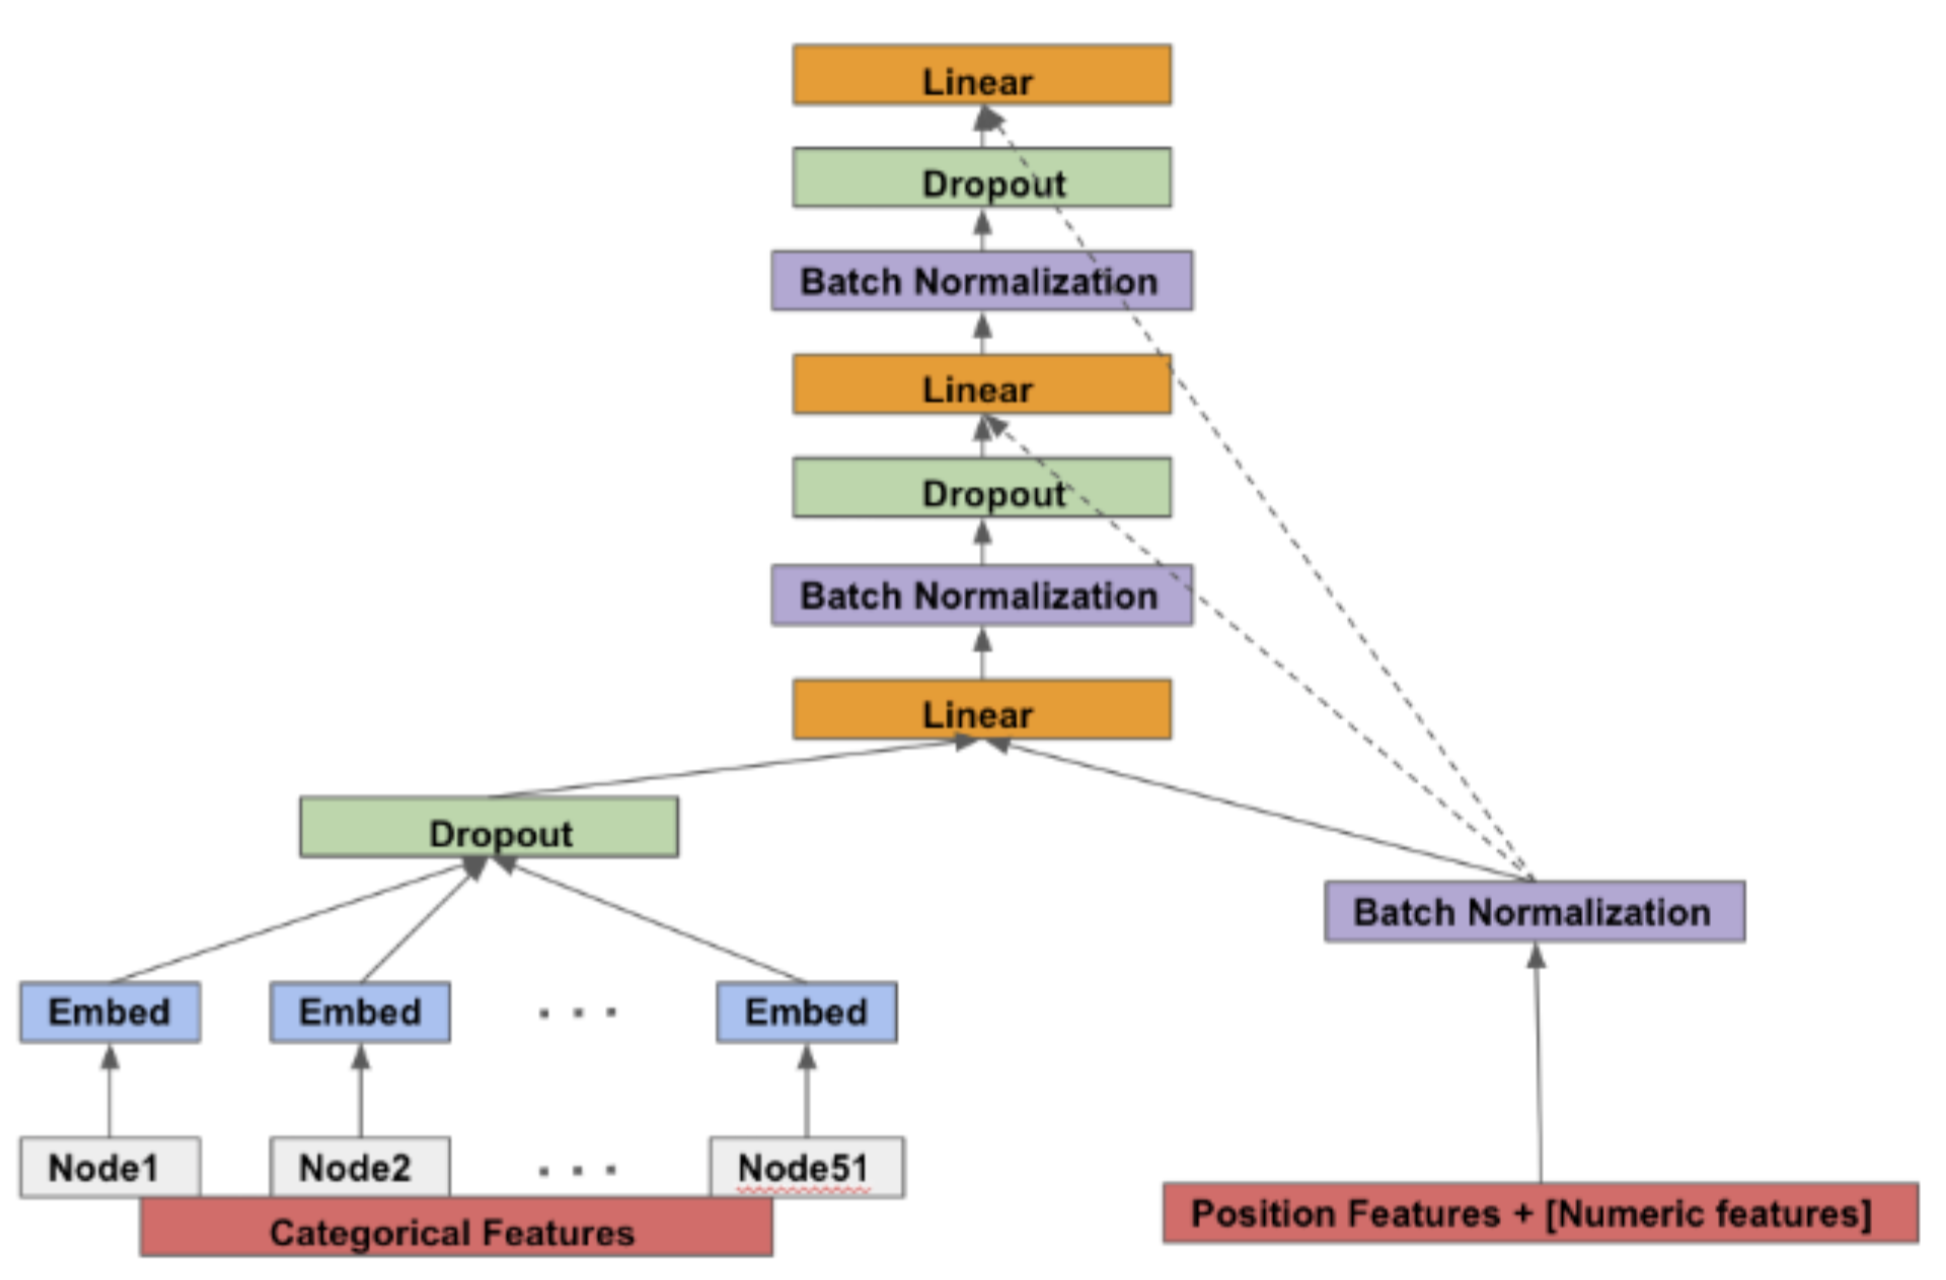  A simplified model architecture from 2022 showing how position features are only used in some of the neural network to predict engagement. Position features are included with numeric features but excluded from the GBDT that generates categorical features.